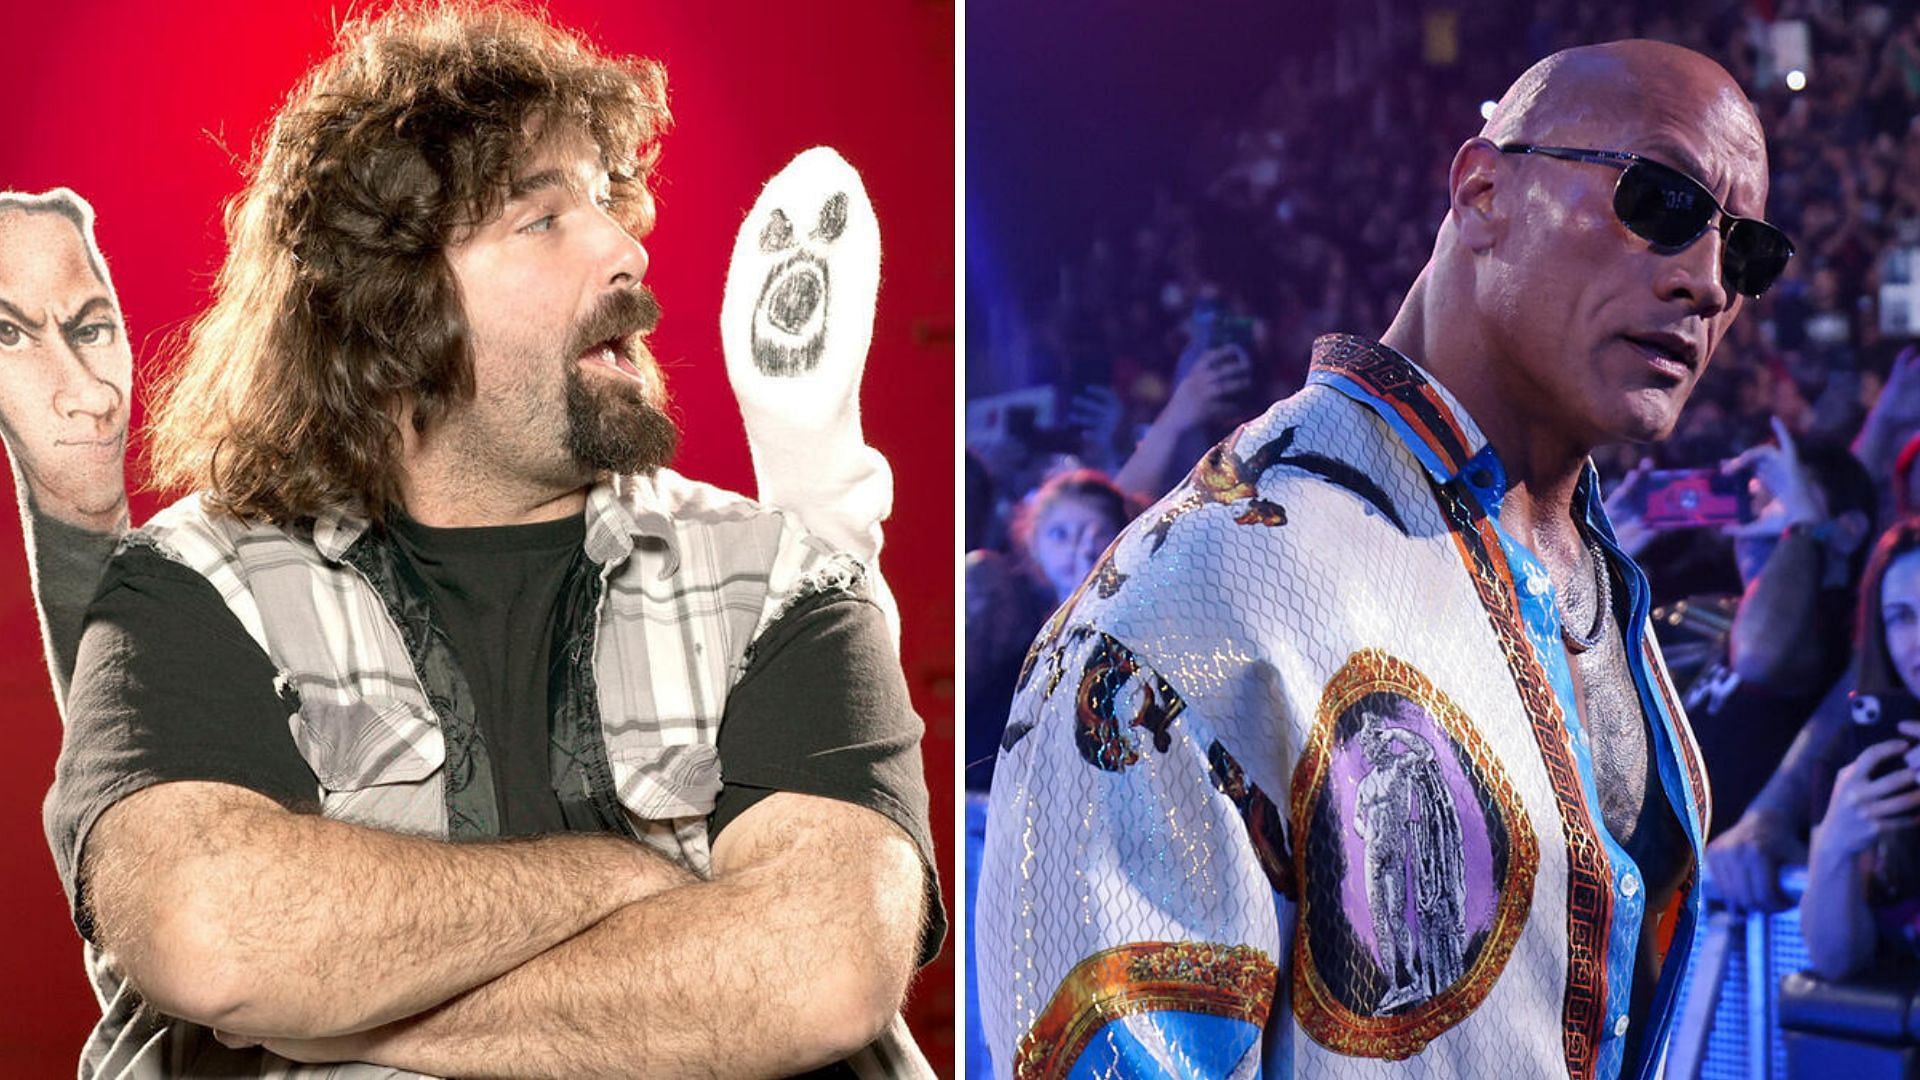 Mick Foley and The Rock have a special &quot;connection&quot;